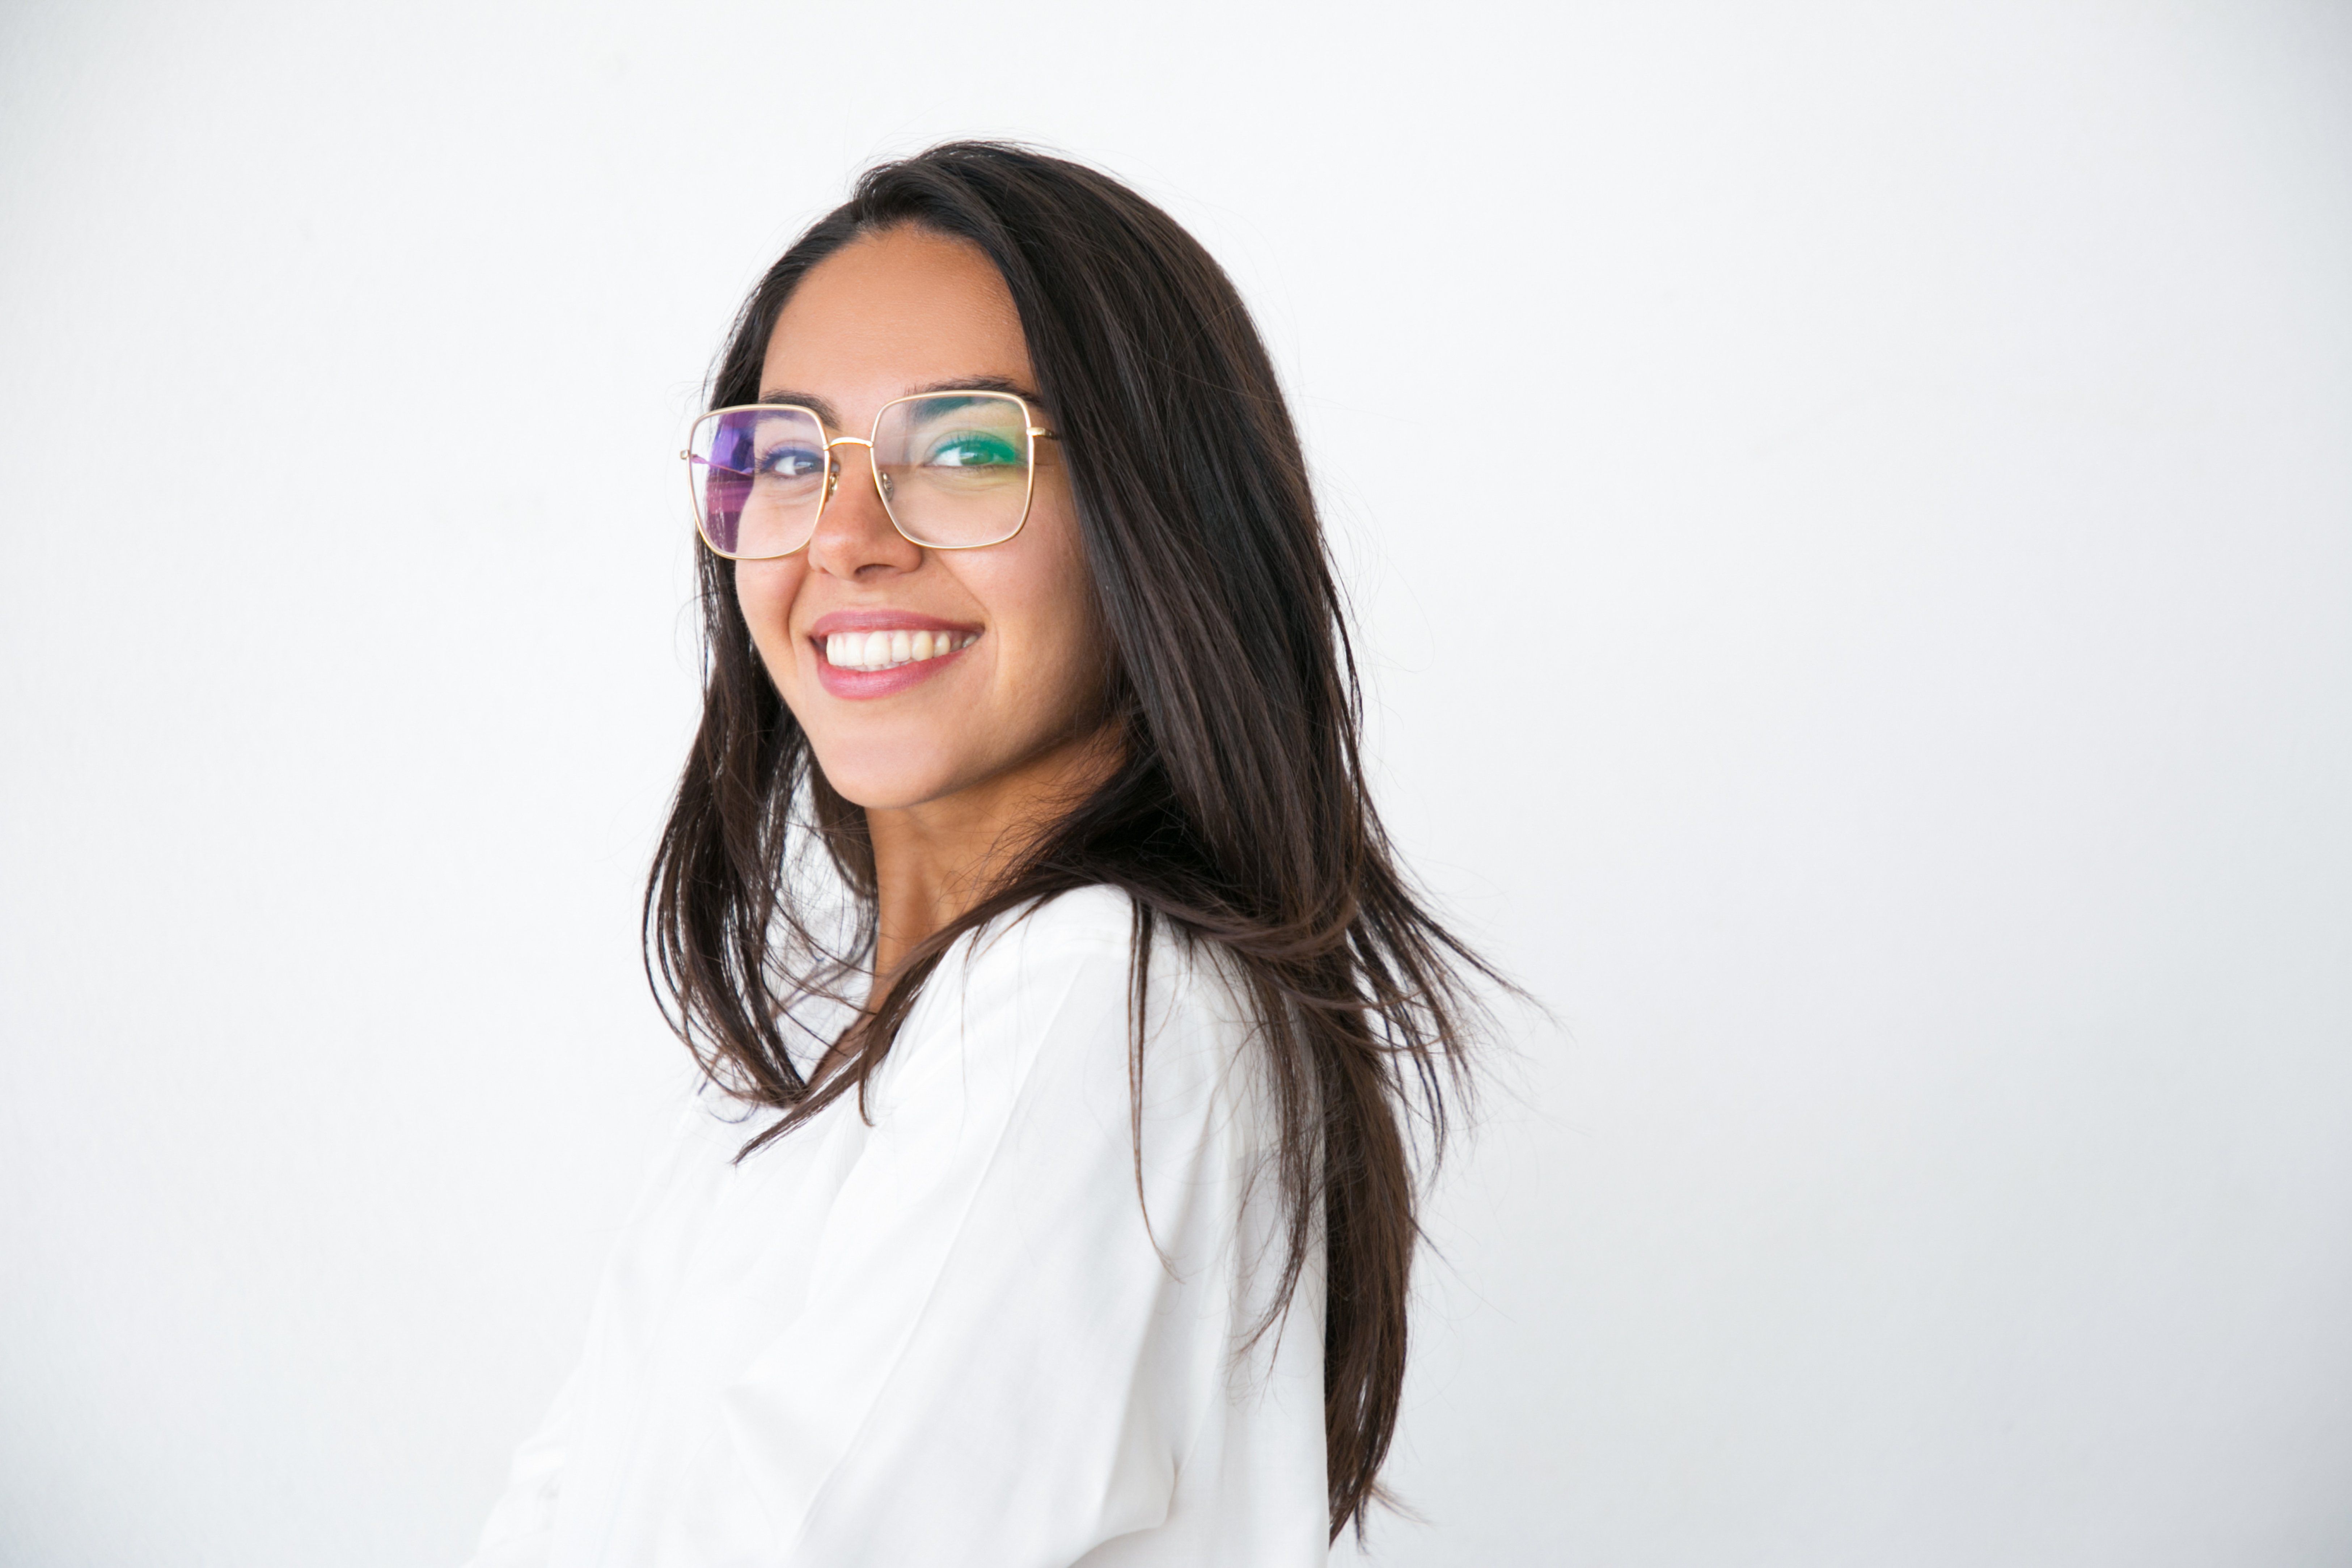 The Top Glasses Trends for 2023 to Get Ahead of the Style Game